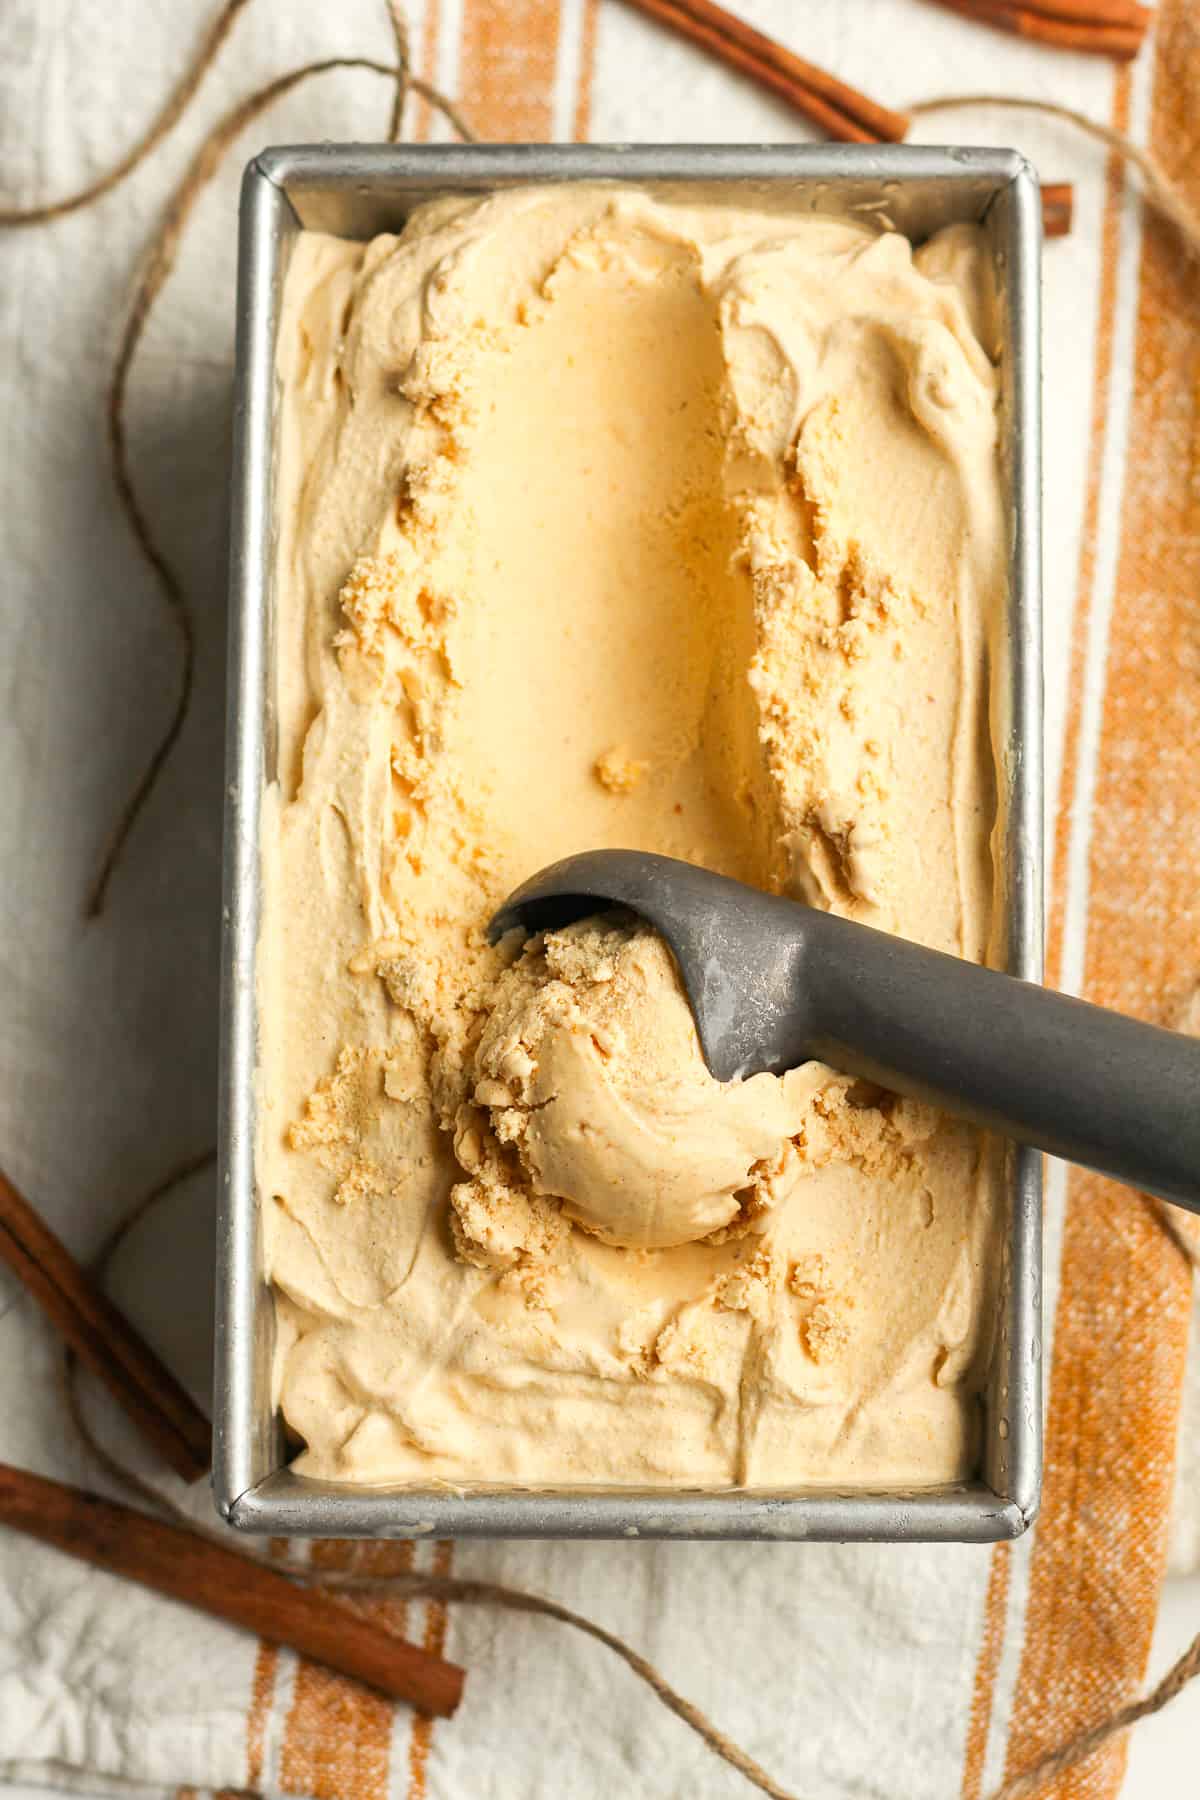 A pan of pumpkin ice cream, with a scoop inside the pan.